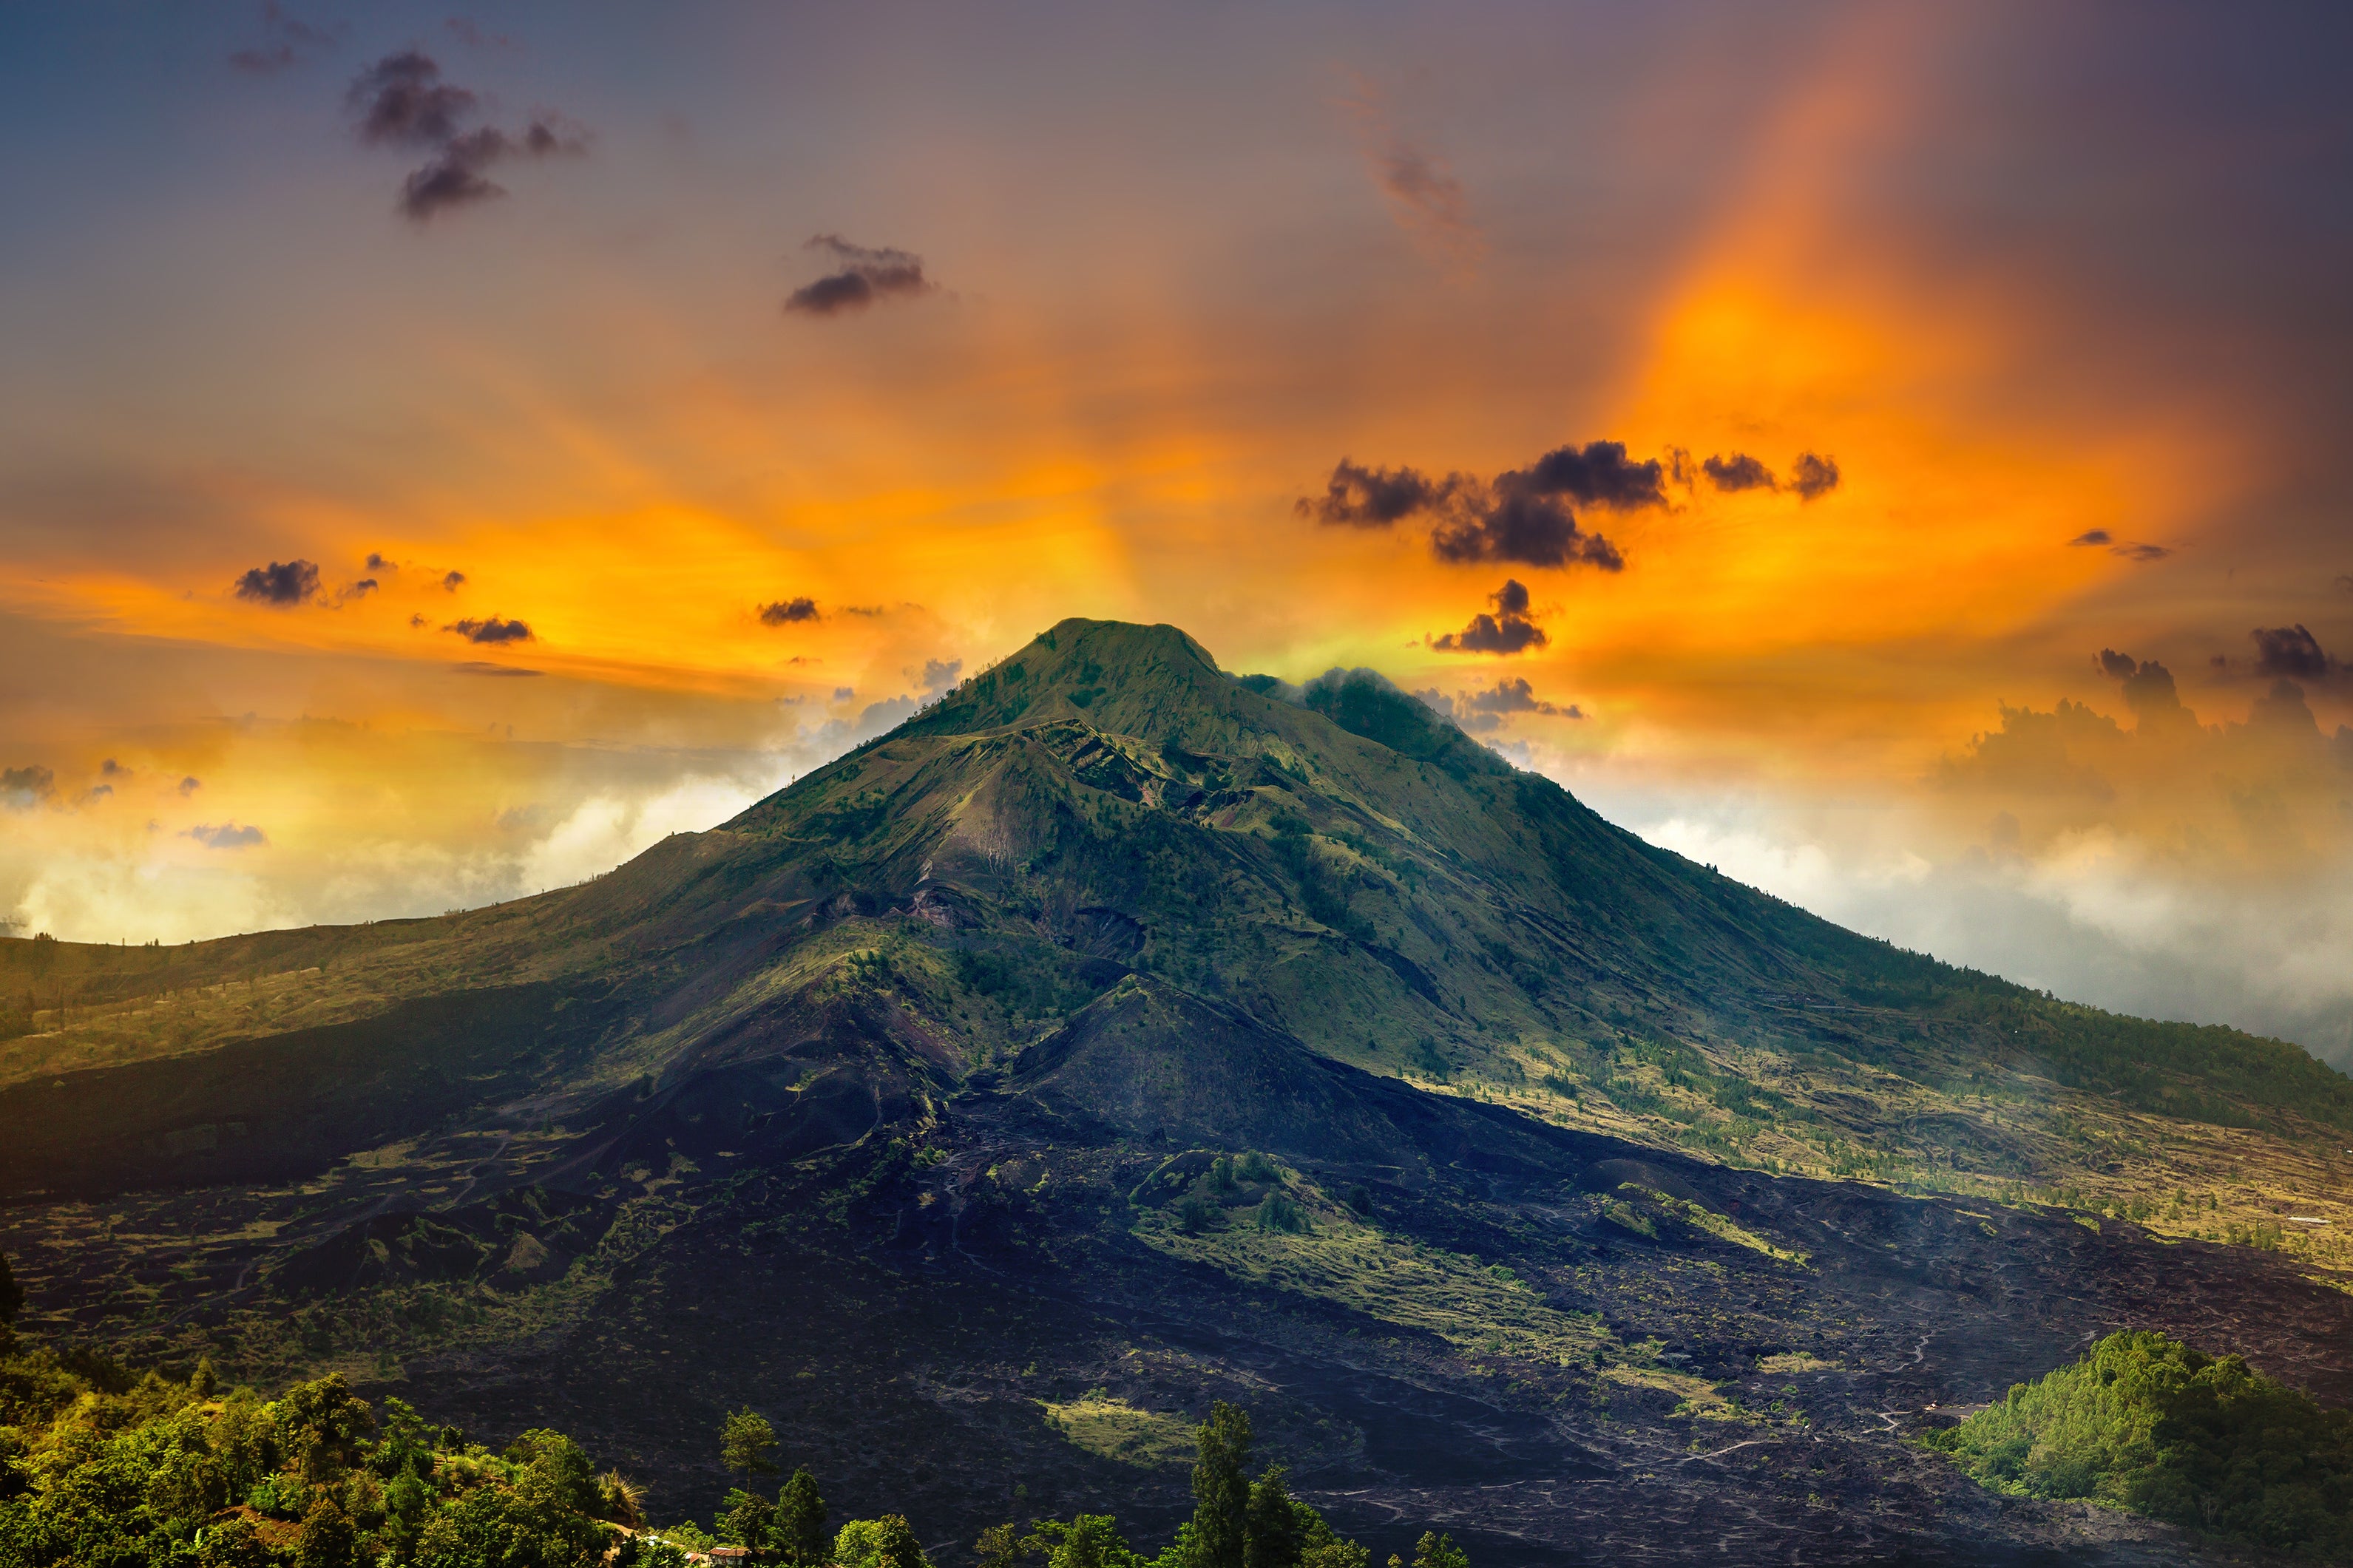 Wake up early for the very best Mount Batur experience